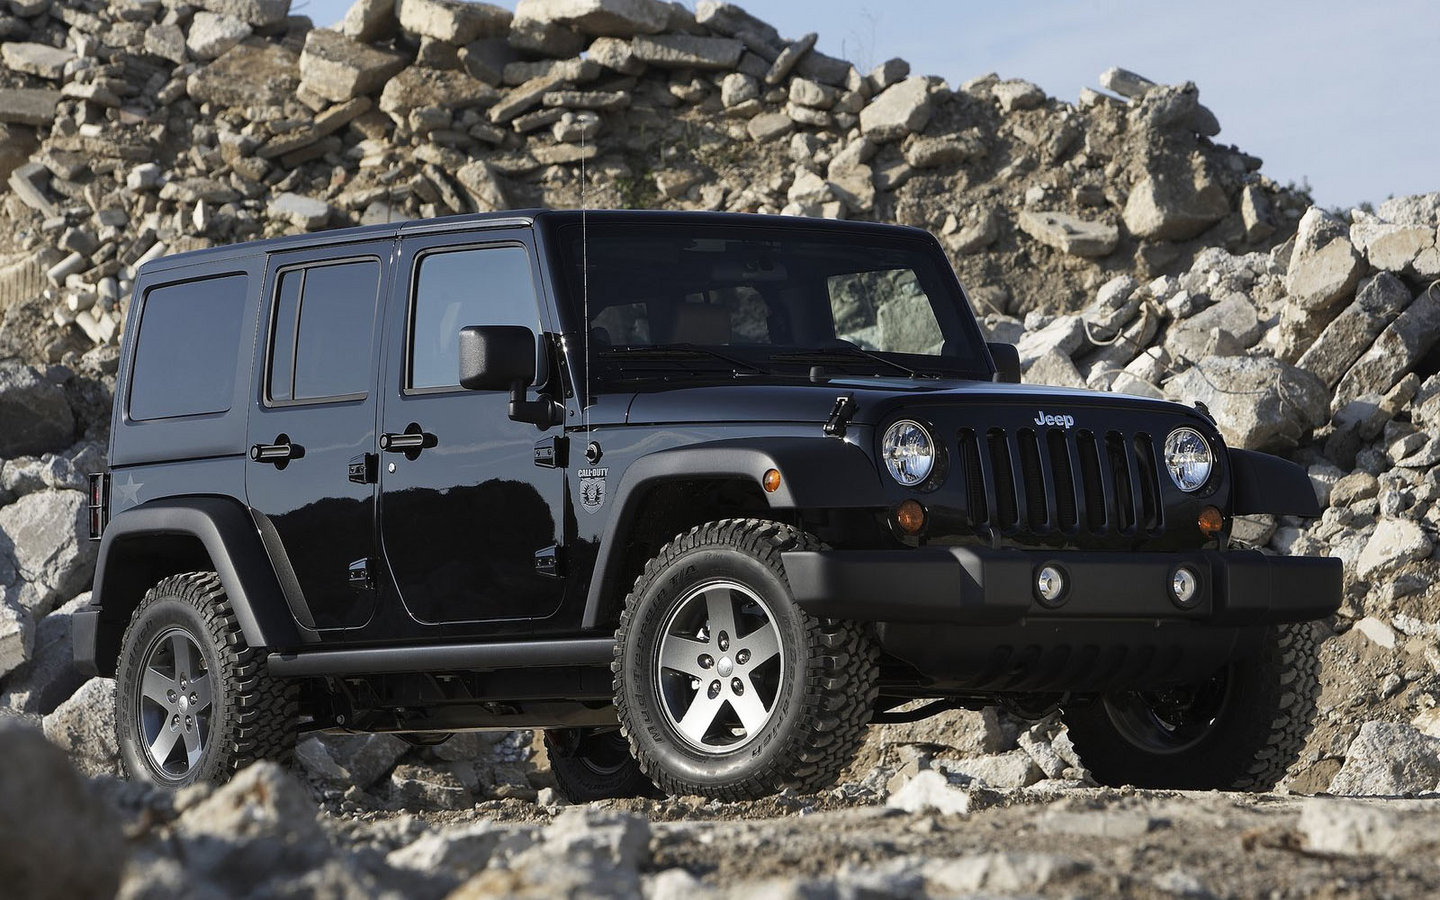 Cost of tires for jeep wrangler #1